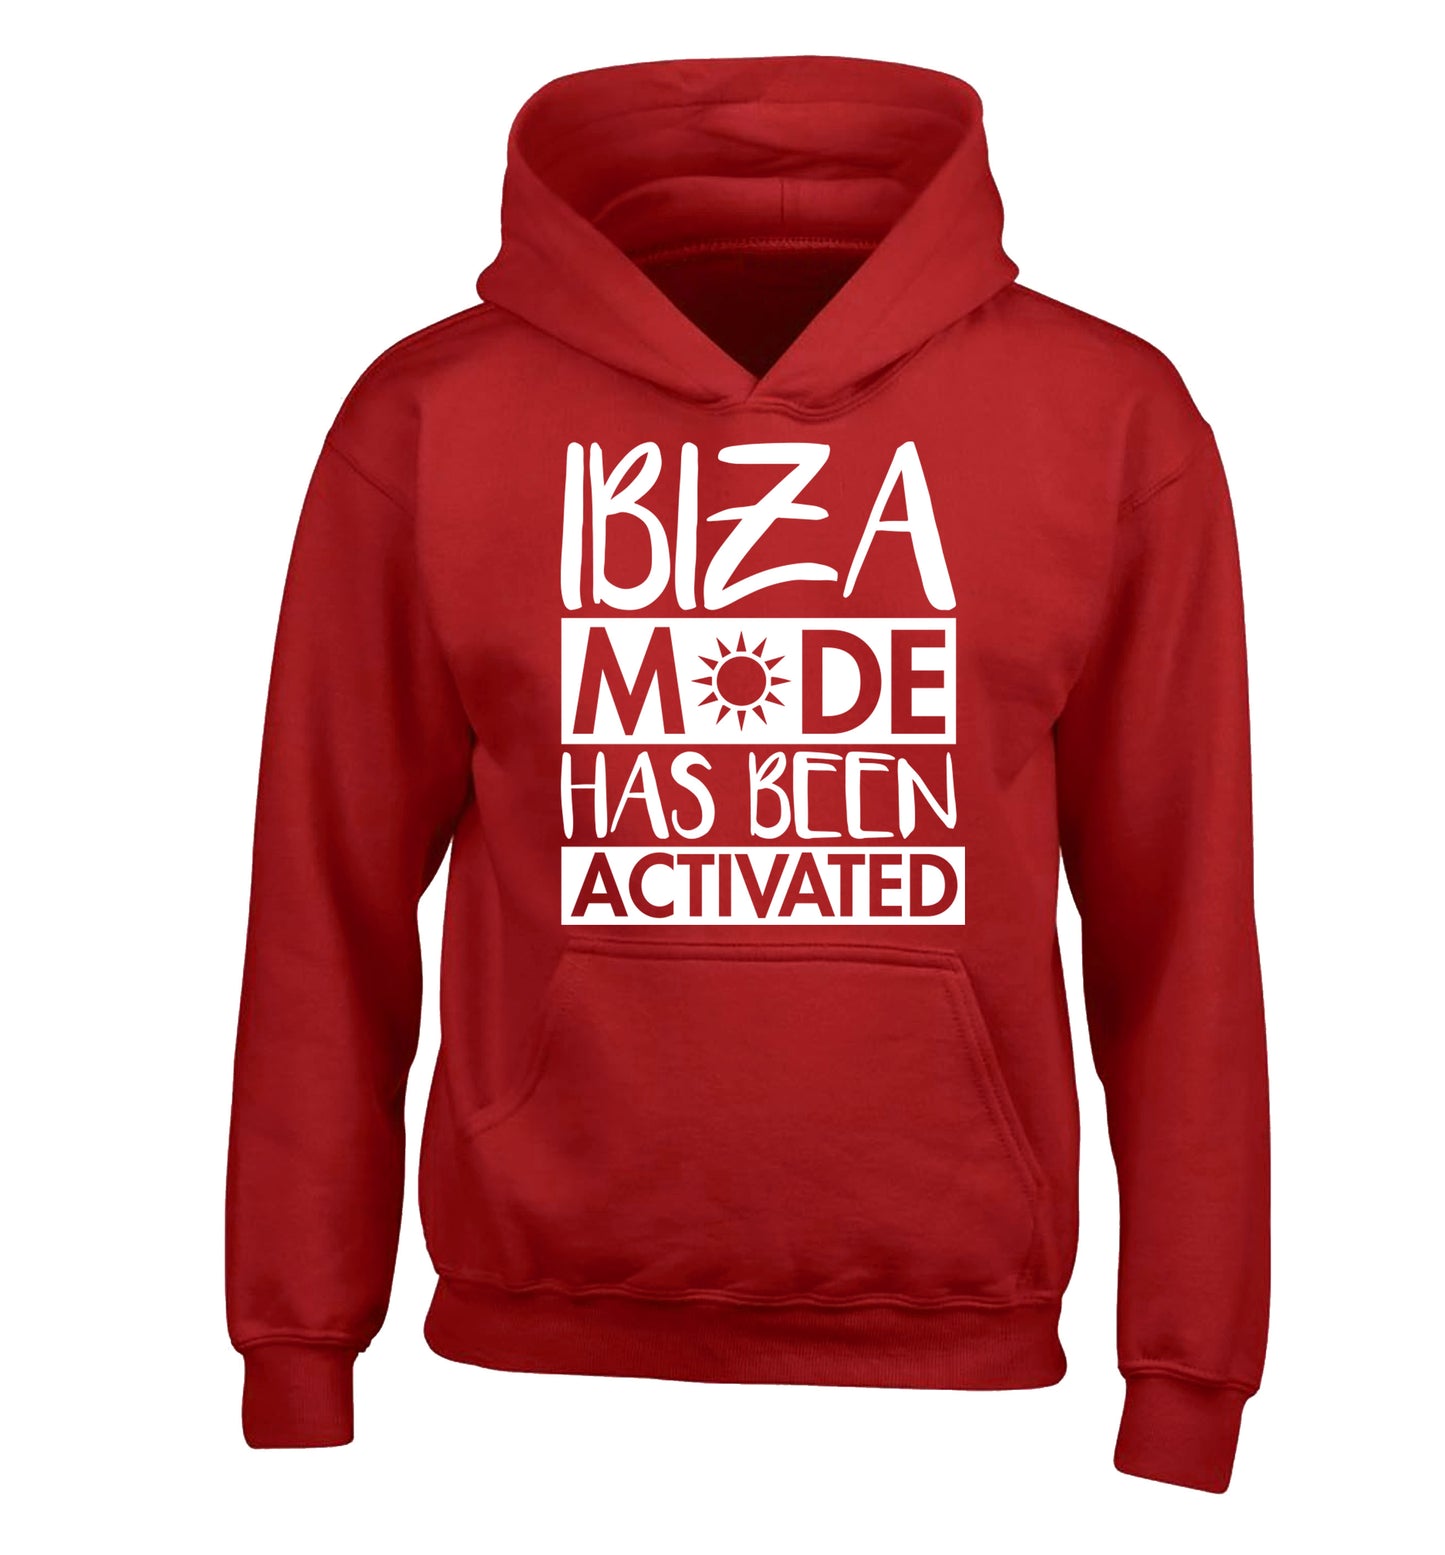 Ibiza mode has been activated children's red hoodie 12-13 Years